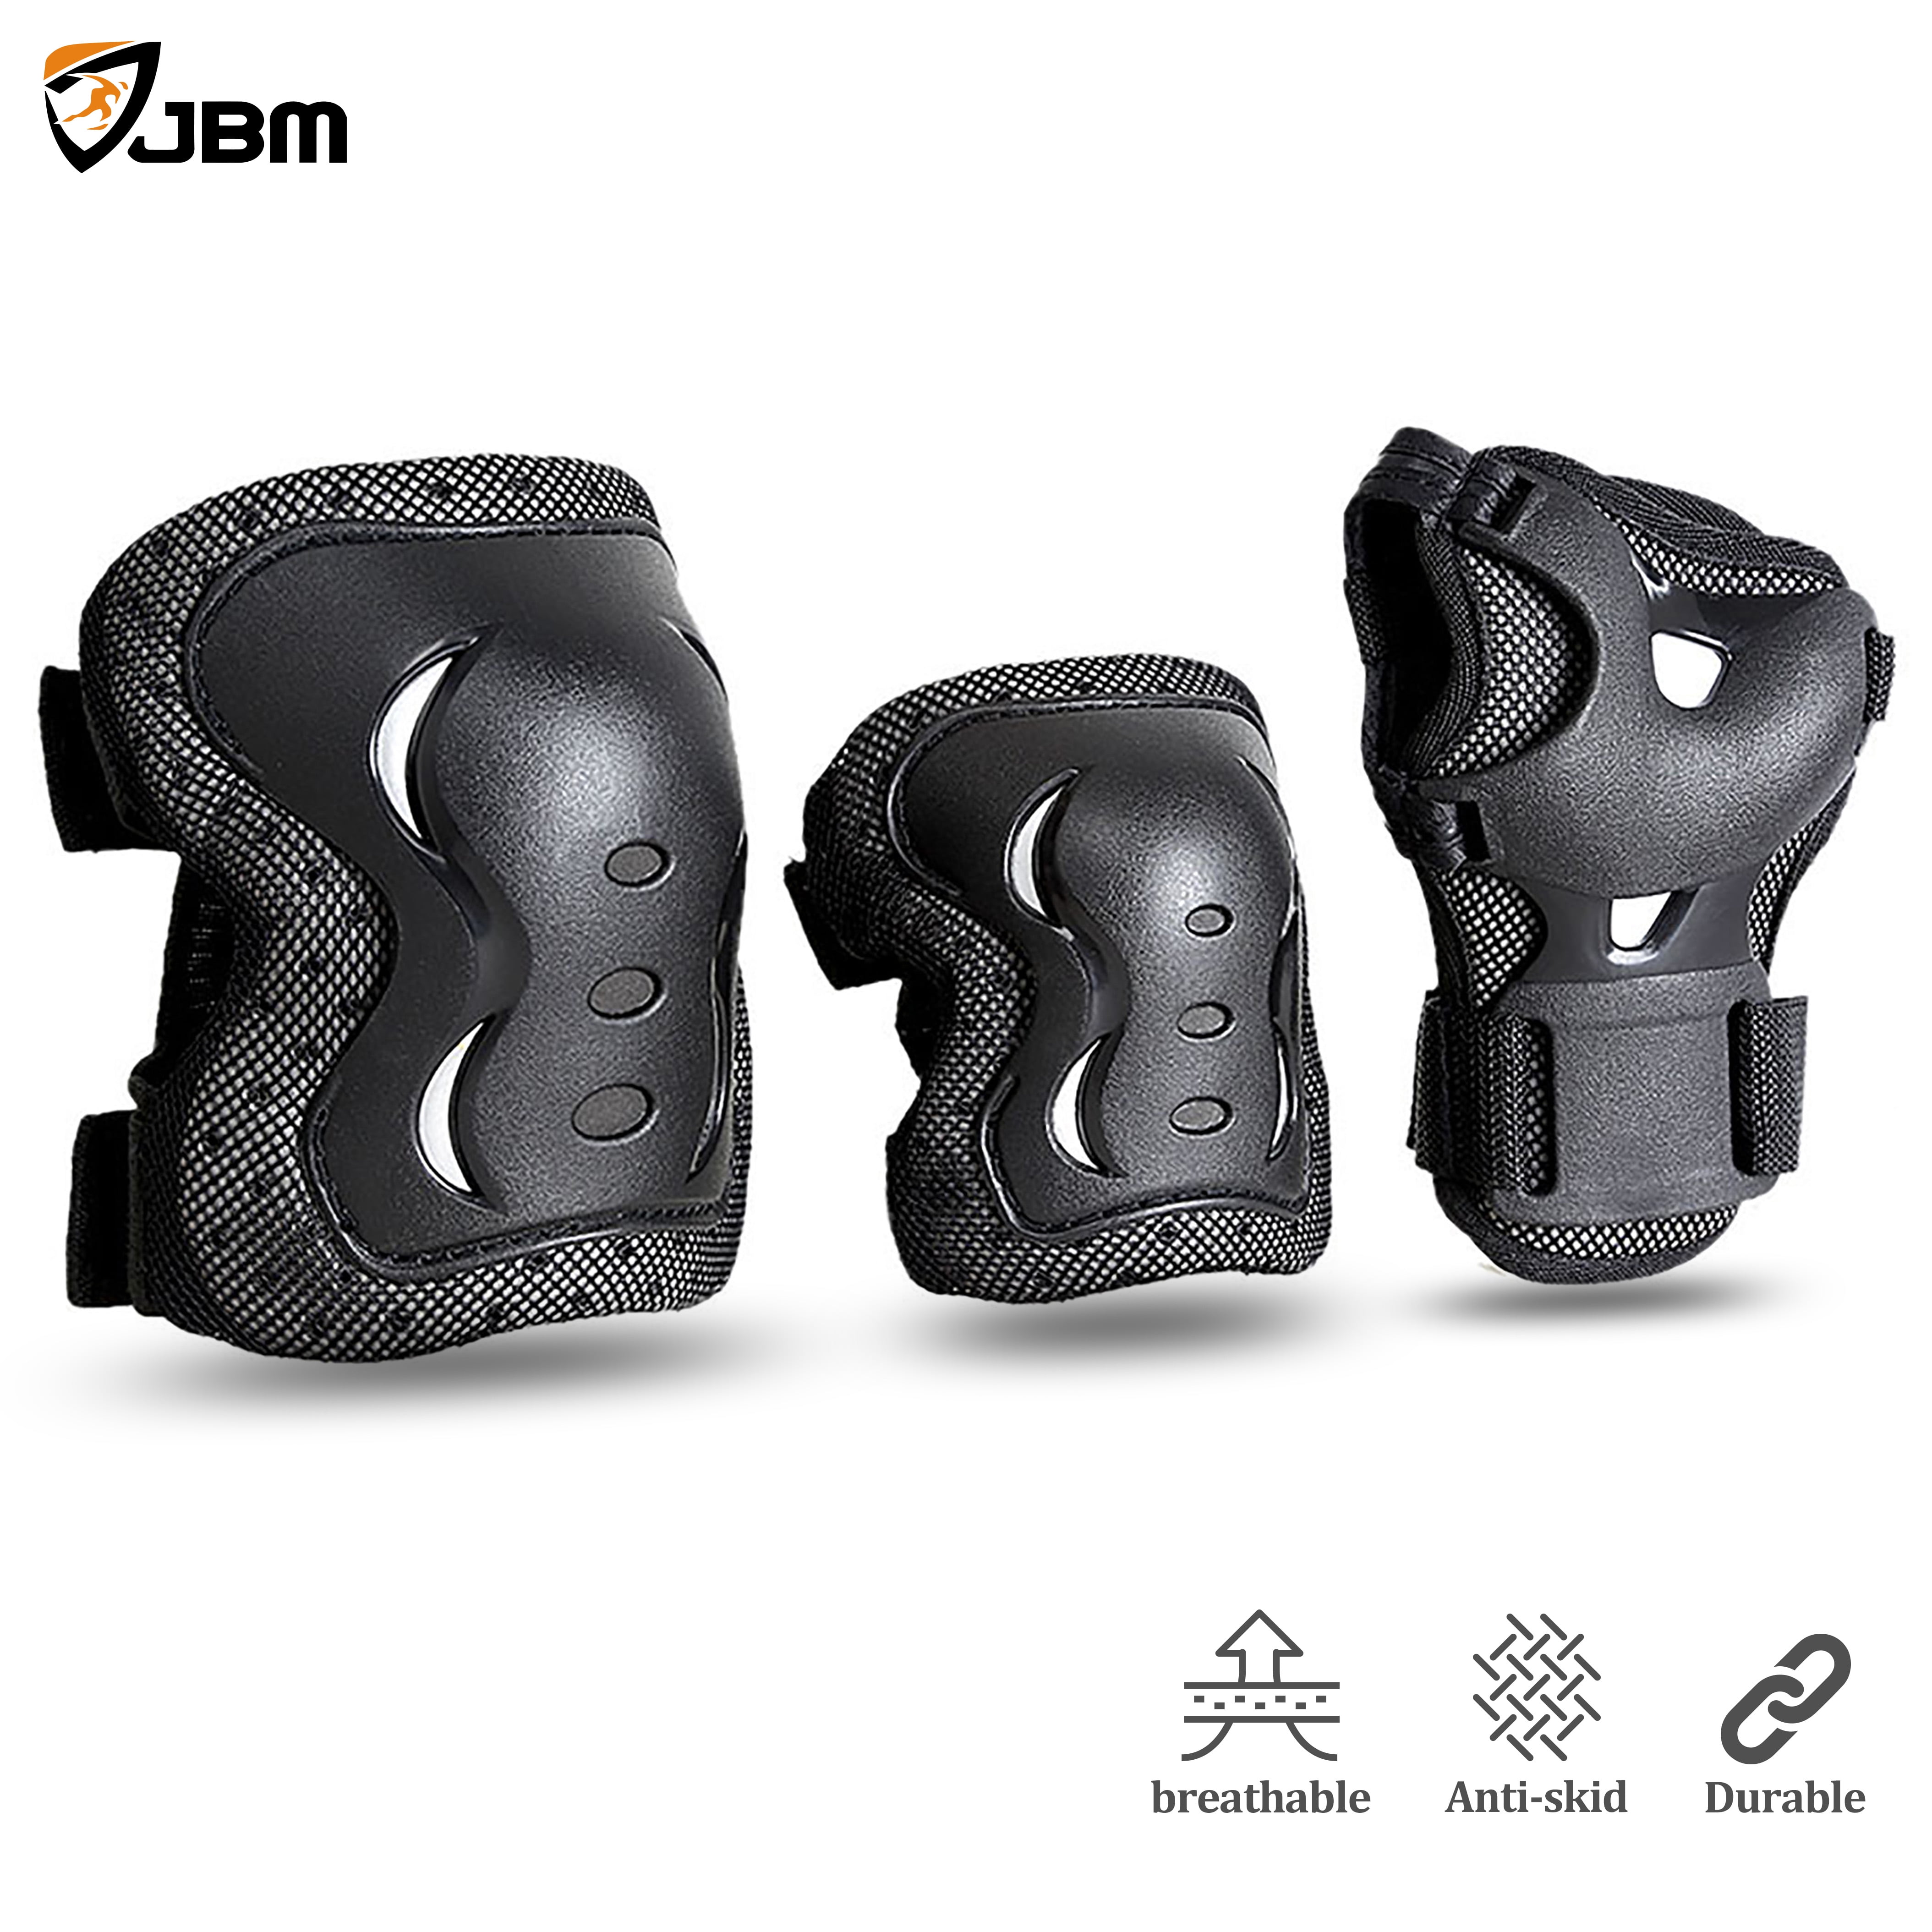 6PCS Kids Knee Elbow Pads Wrist Protective Gear Guards for Roller Skates Cycling